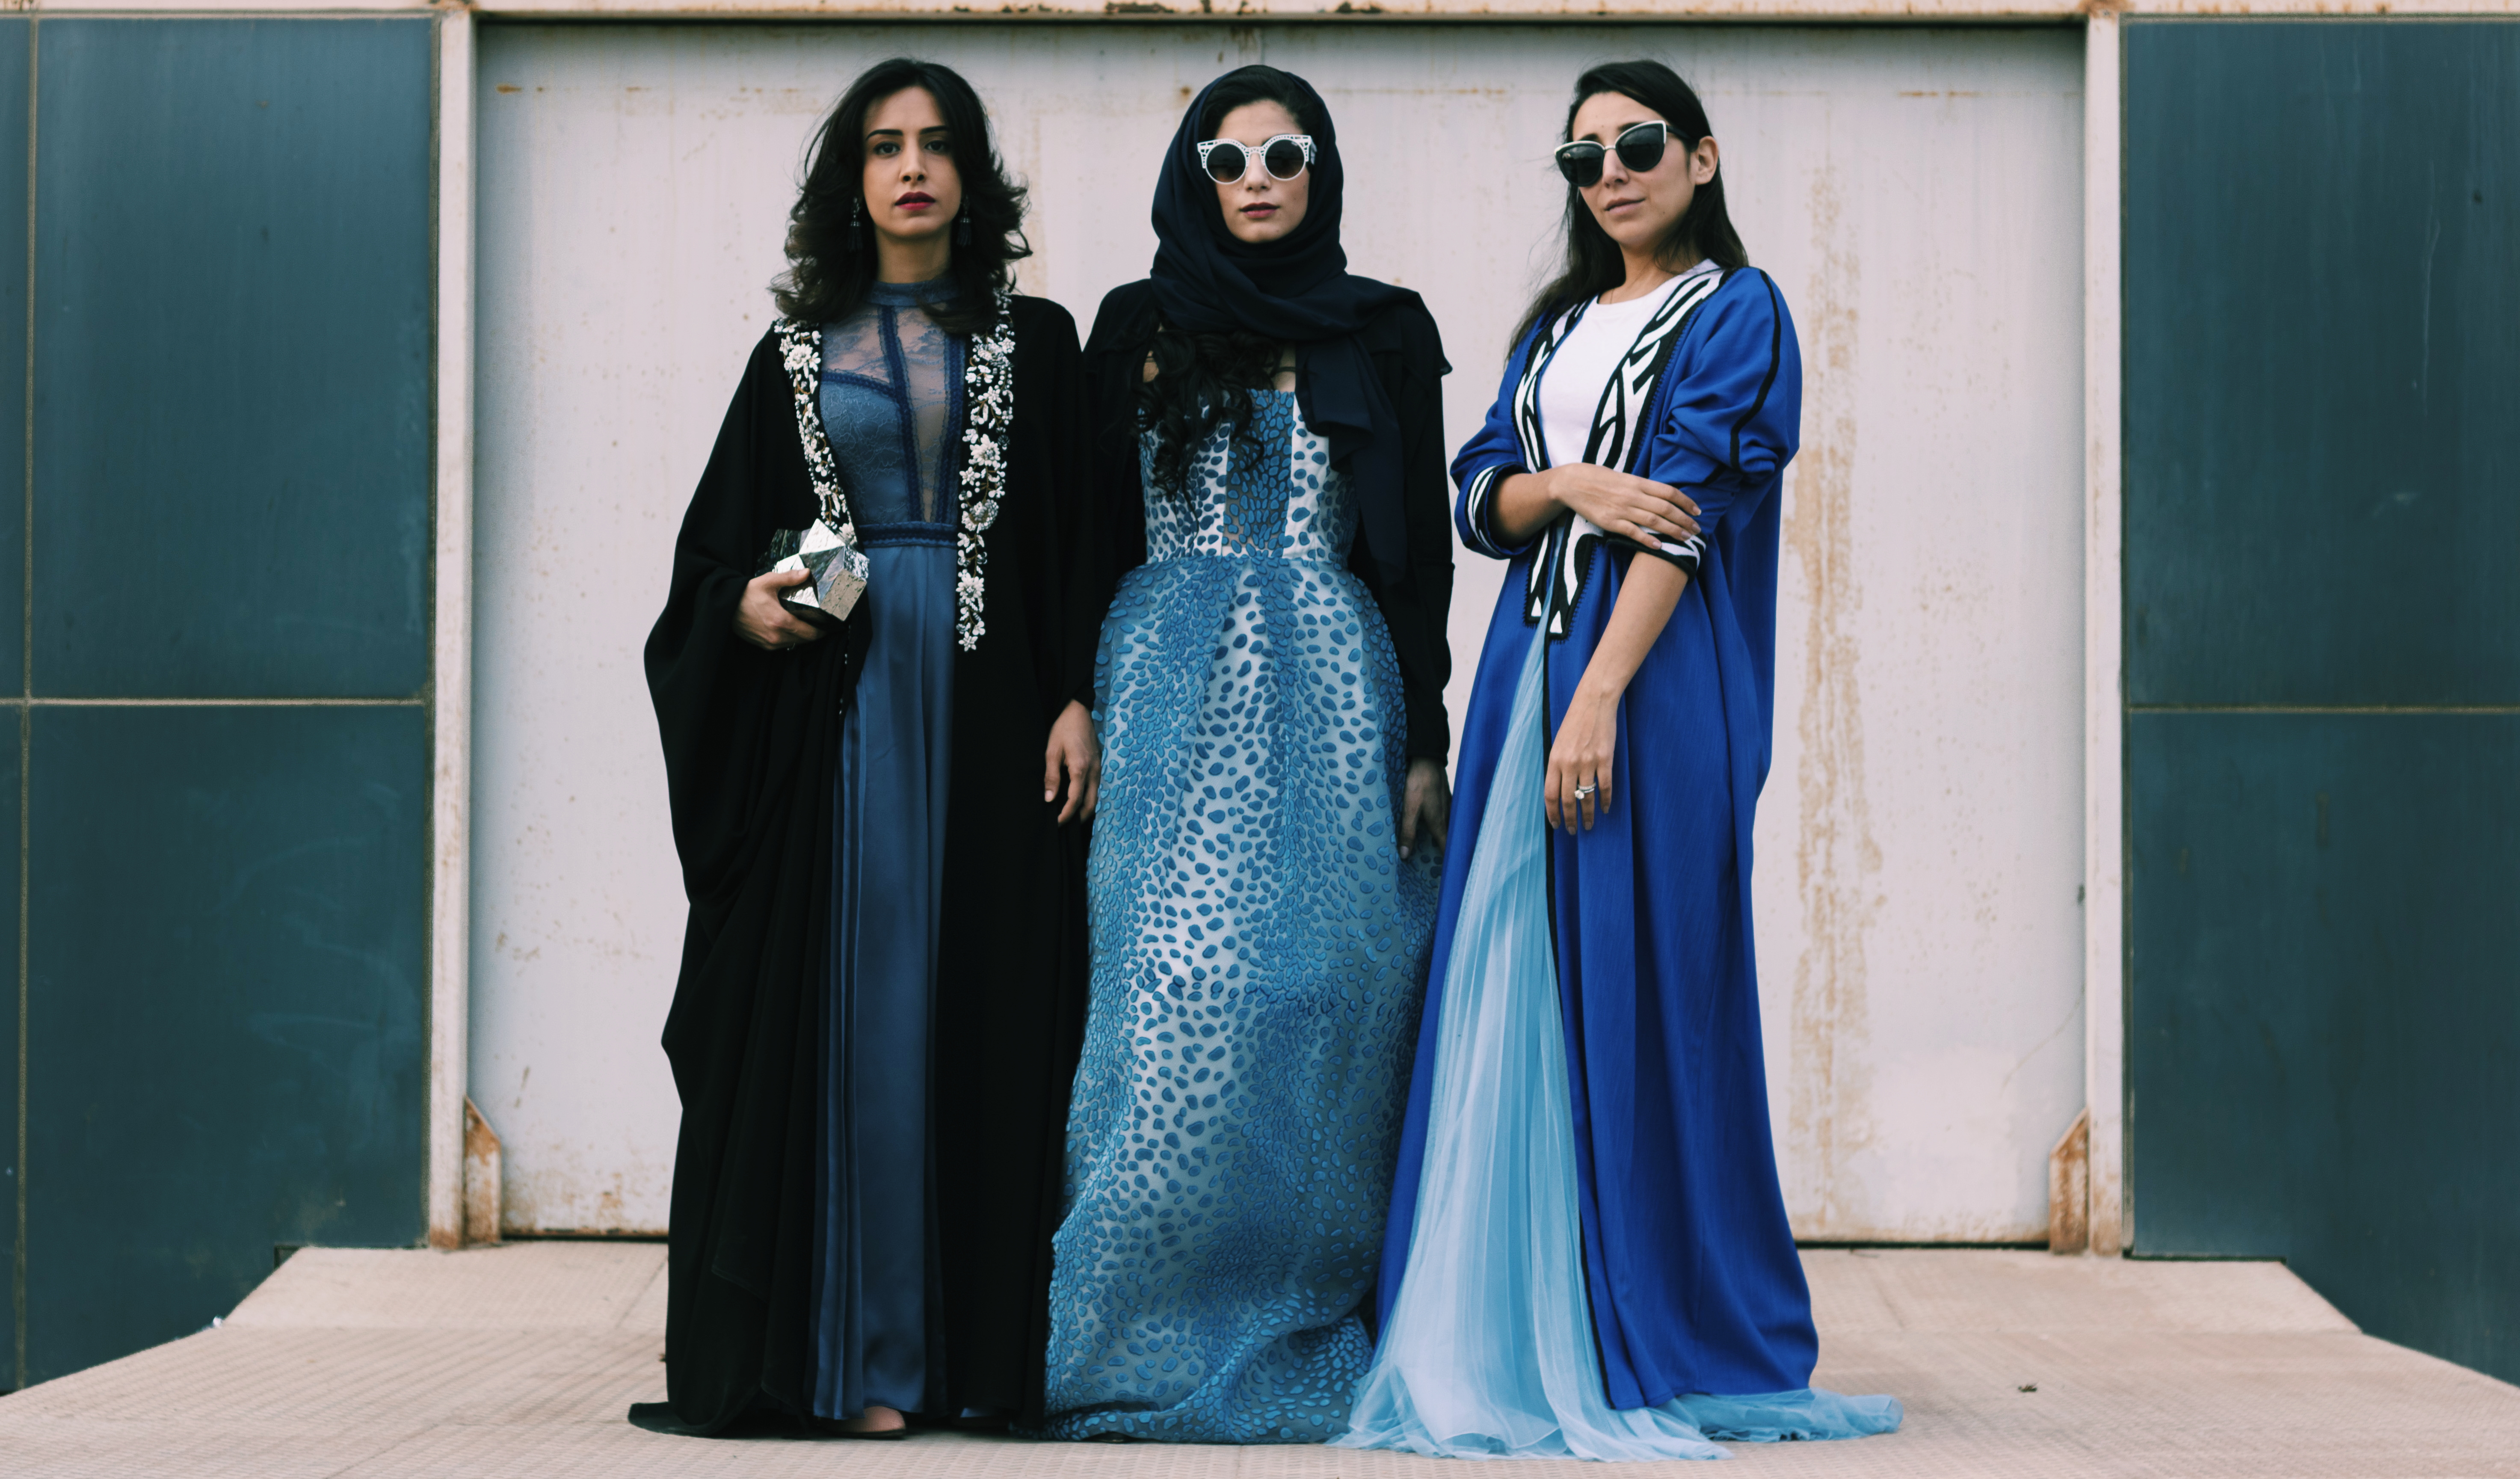 In pictures: Yes, Saudi women dress like this